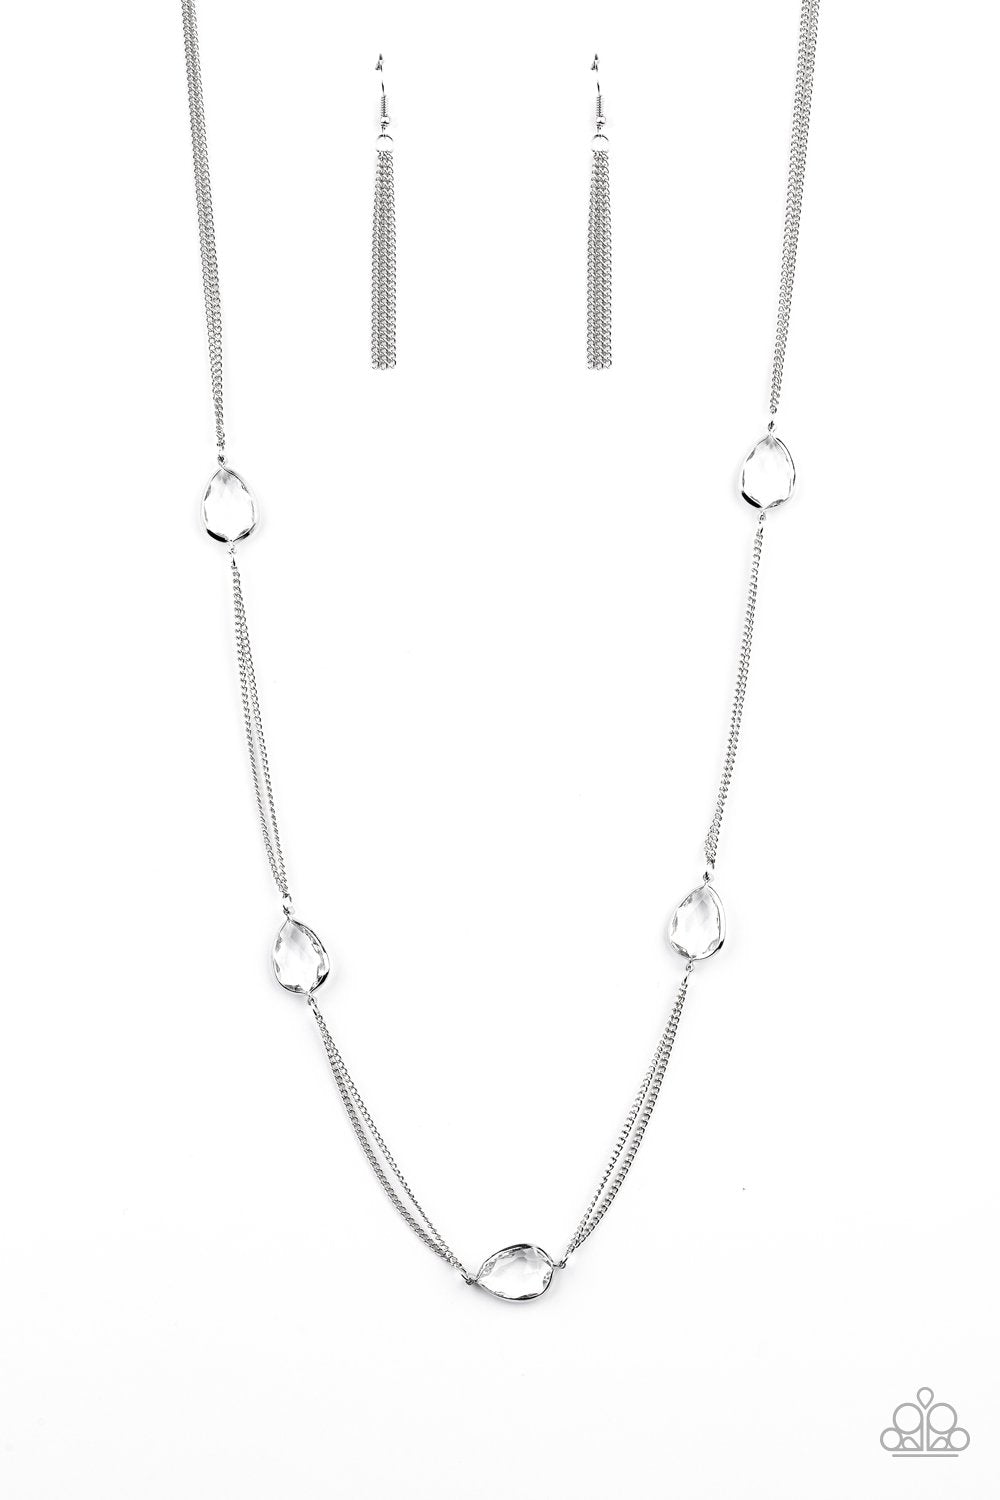 Teardrop Timelessness White Necklace - Paparazzi Accessories - lightbox -CarasShop.com - $5 Jewelry by Cara Jewels